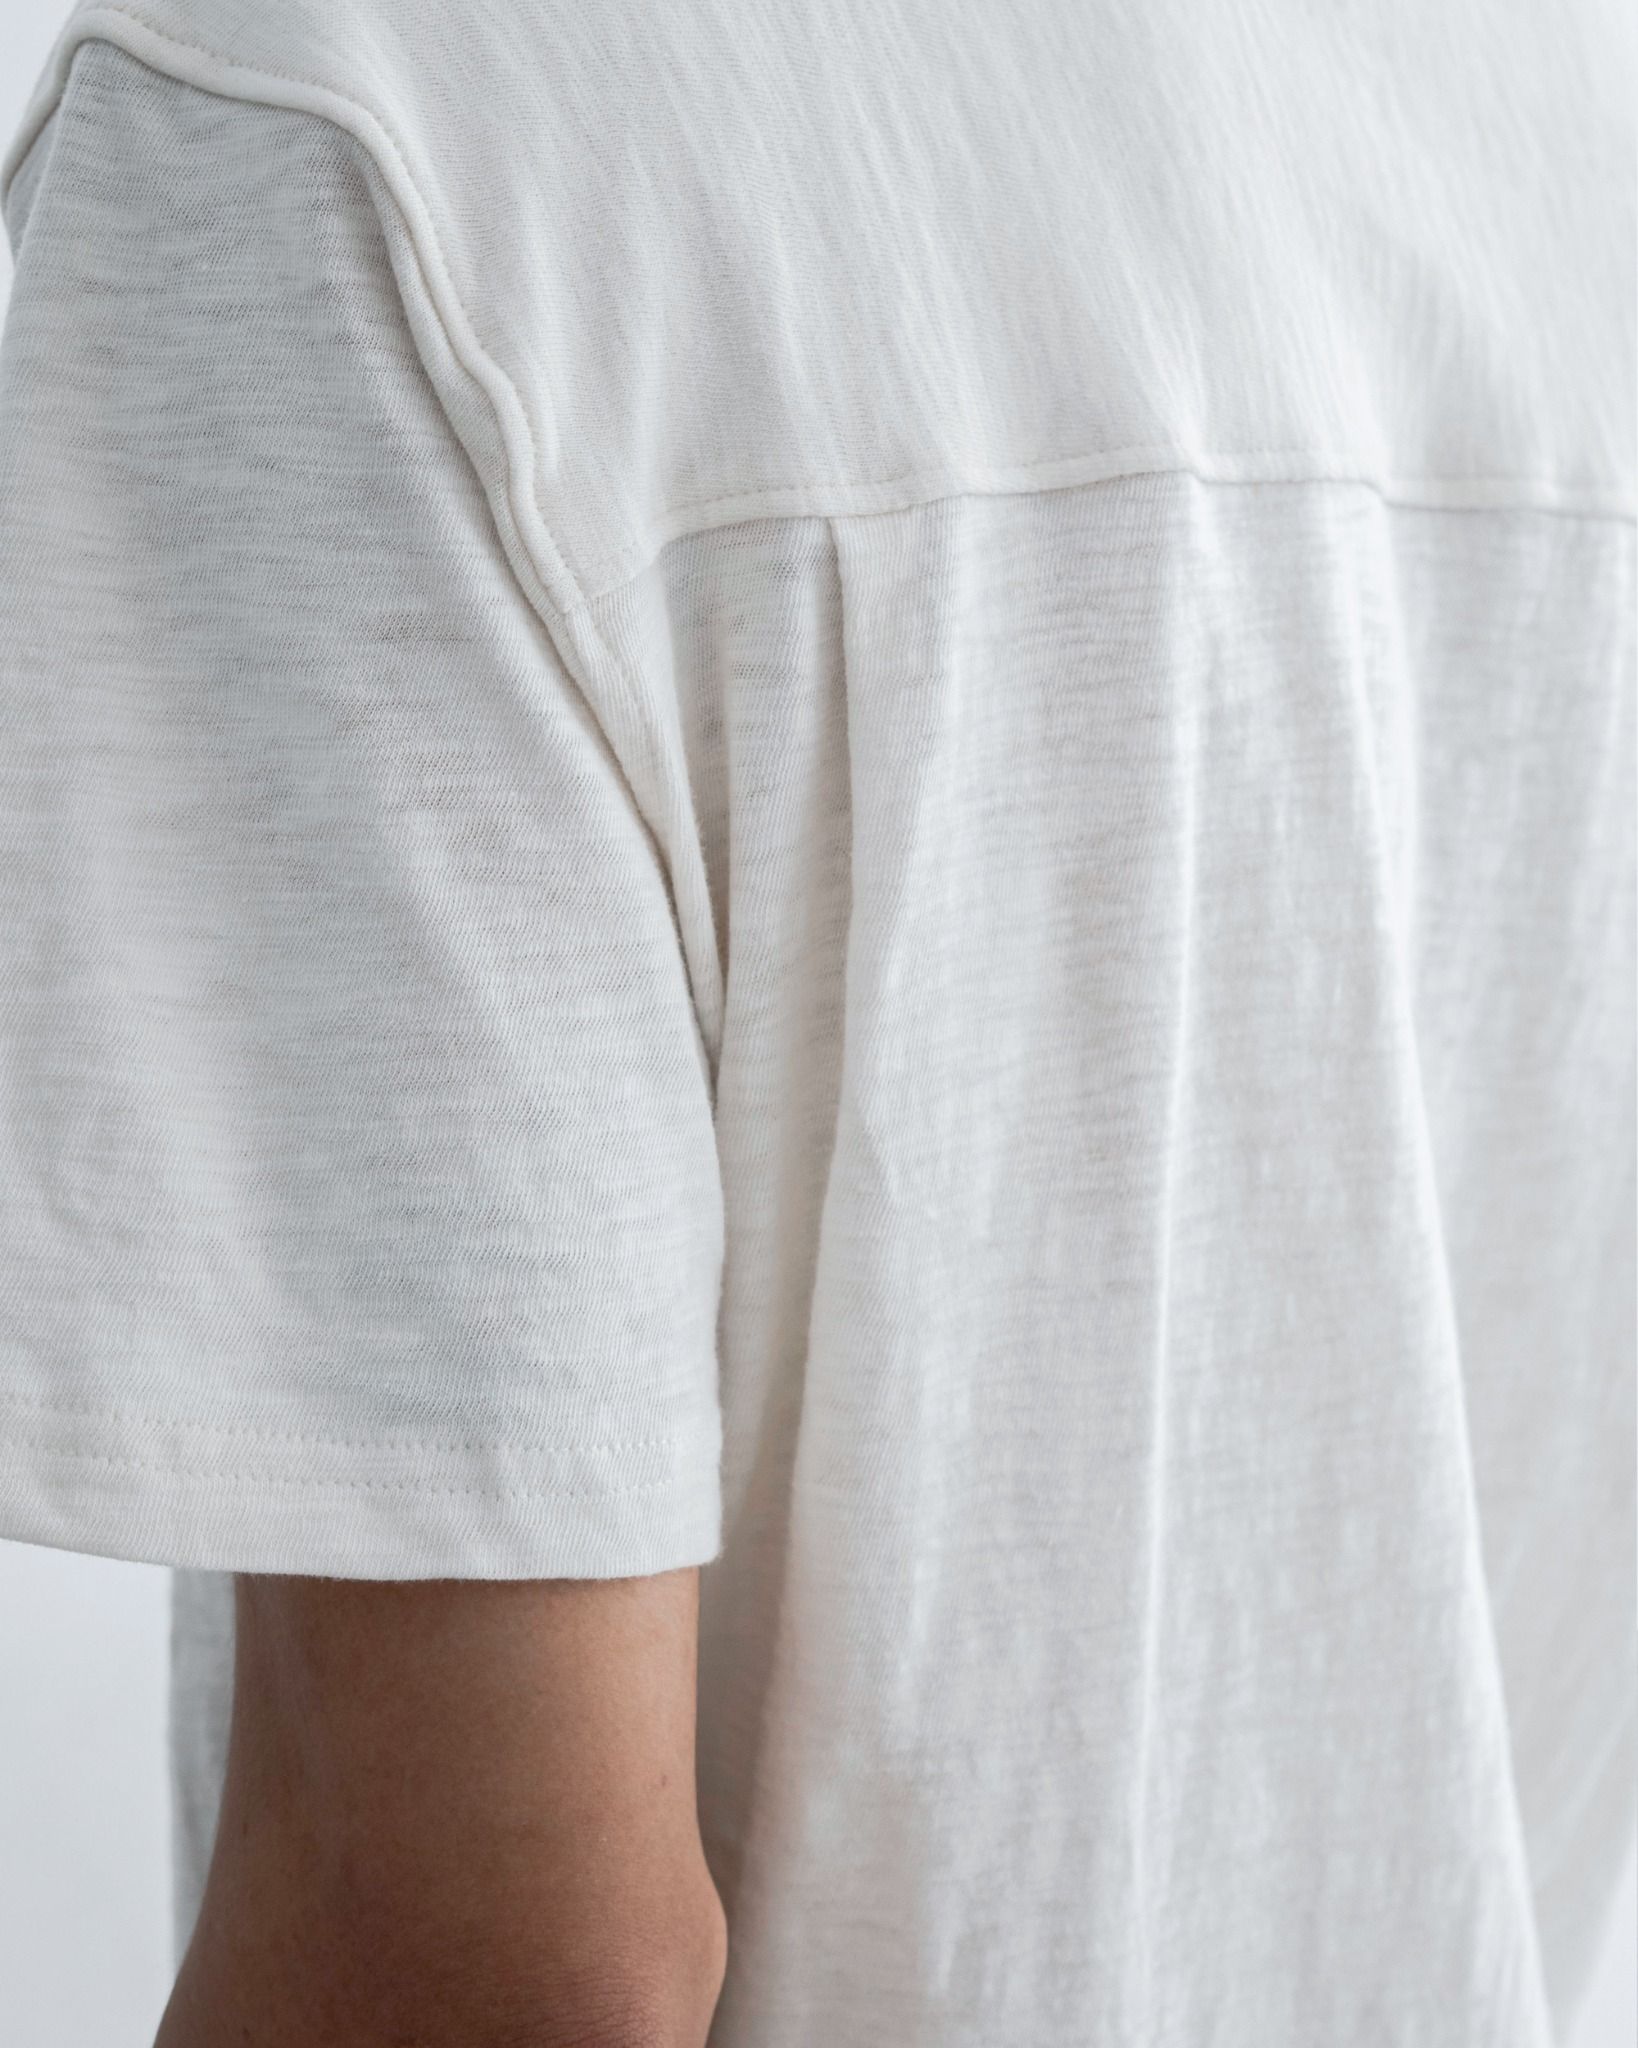 LOOSE FIT T-SHIRTS | WHITE